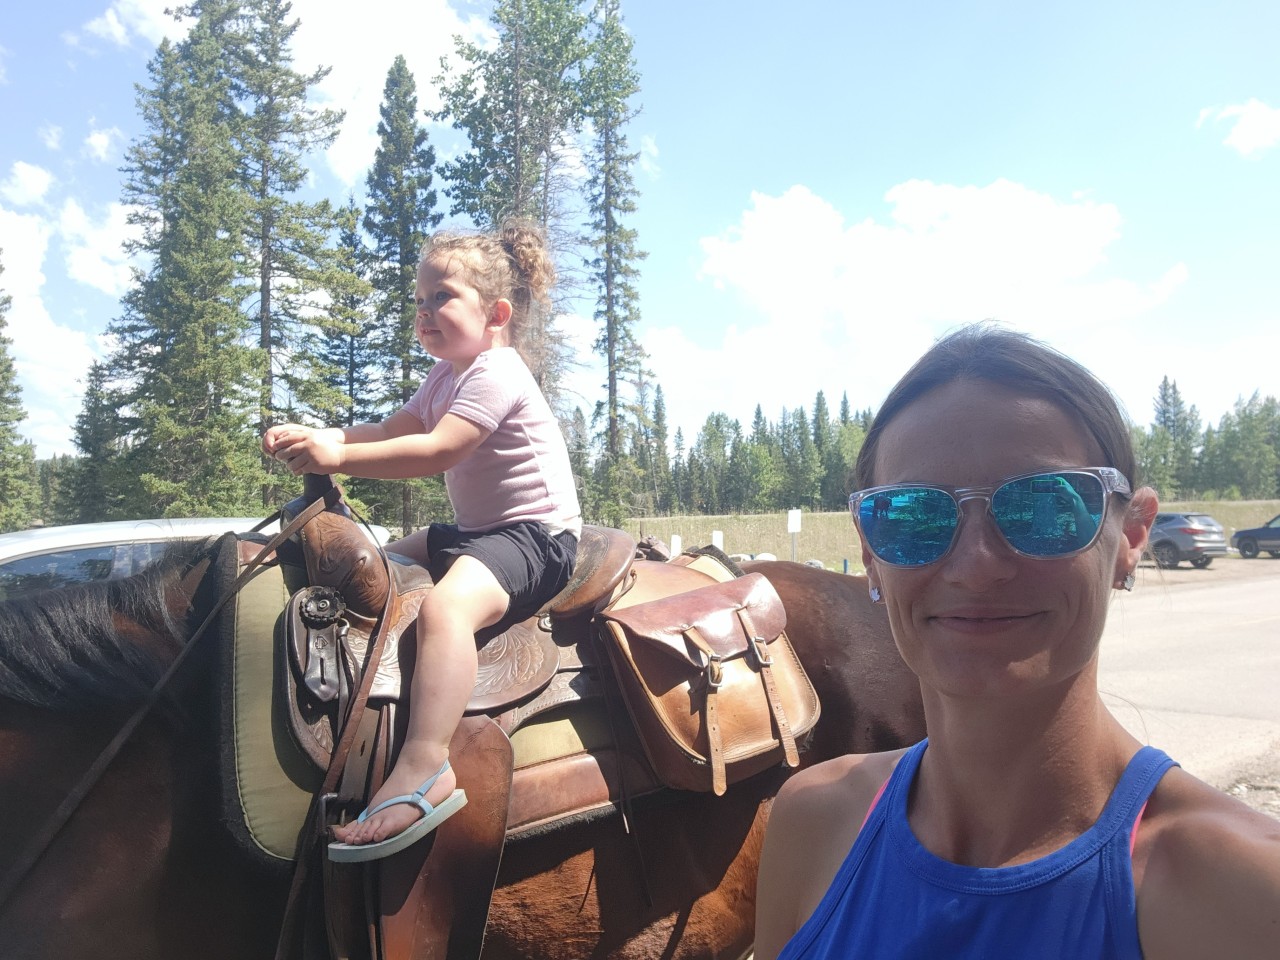 Horseback Riding in Bragg Creek - Bragg Creek offers some unique and amazing events throughout the year. Little Seeker got to ride her 1st horse near the Bragg Creek Trading Post. There are a few fantastic equestrian tour guides in this area that can take you out riding